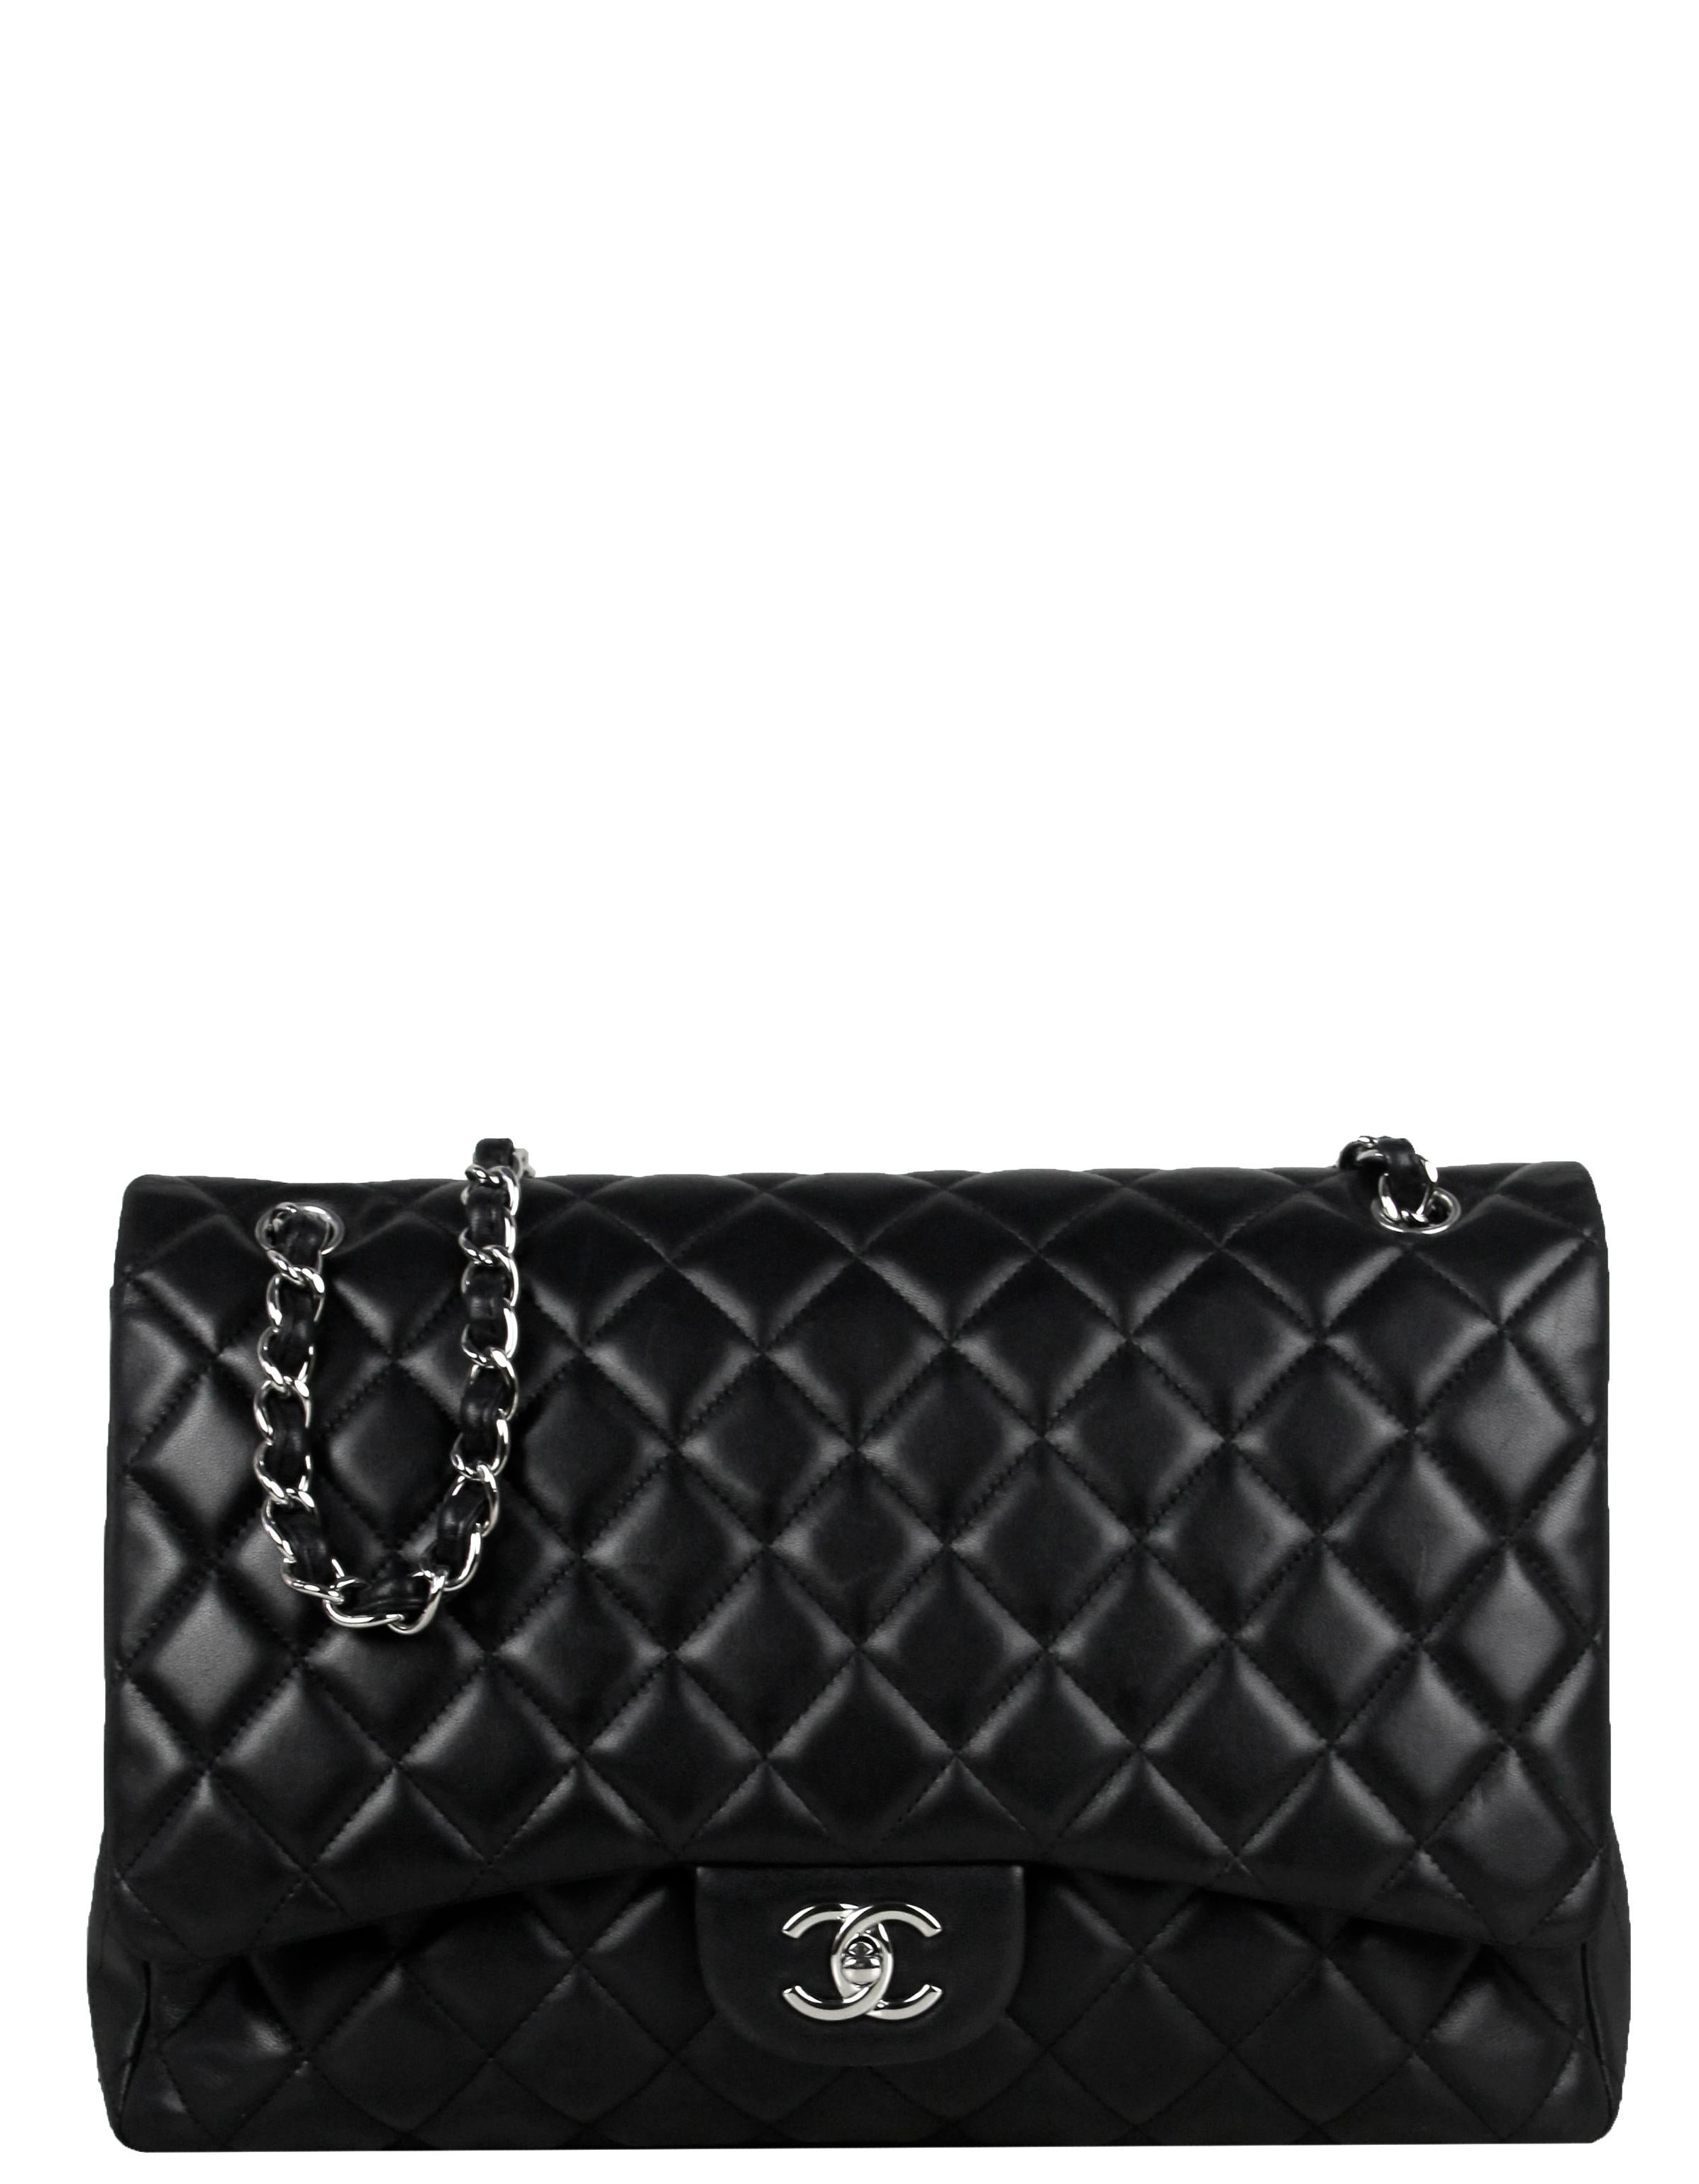 Chanel Black Lambskin Leather Quilted Single Flap Maxi Bag For Sale 4